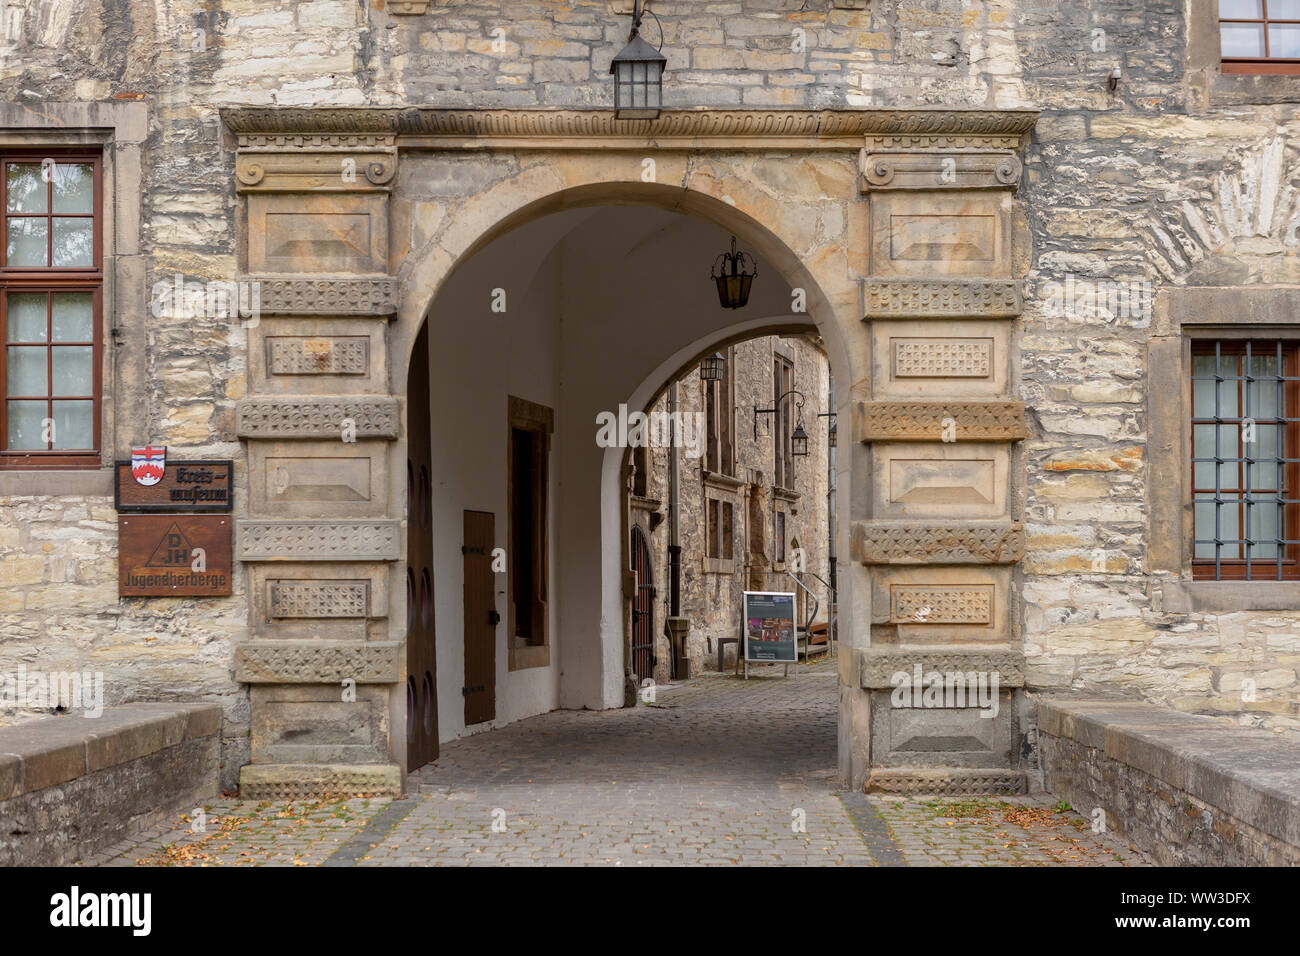 Architectural detail of the main access portal to the courtyard of the Wewelsburg castle with brick construction Stock Photo